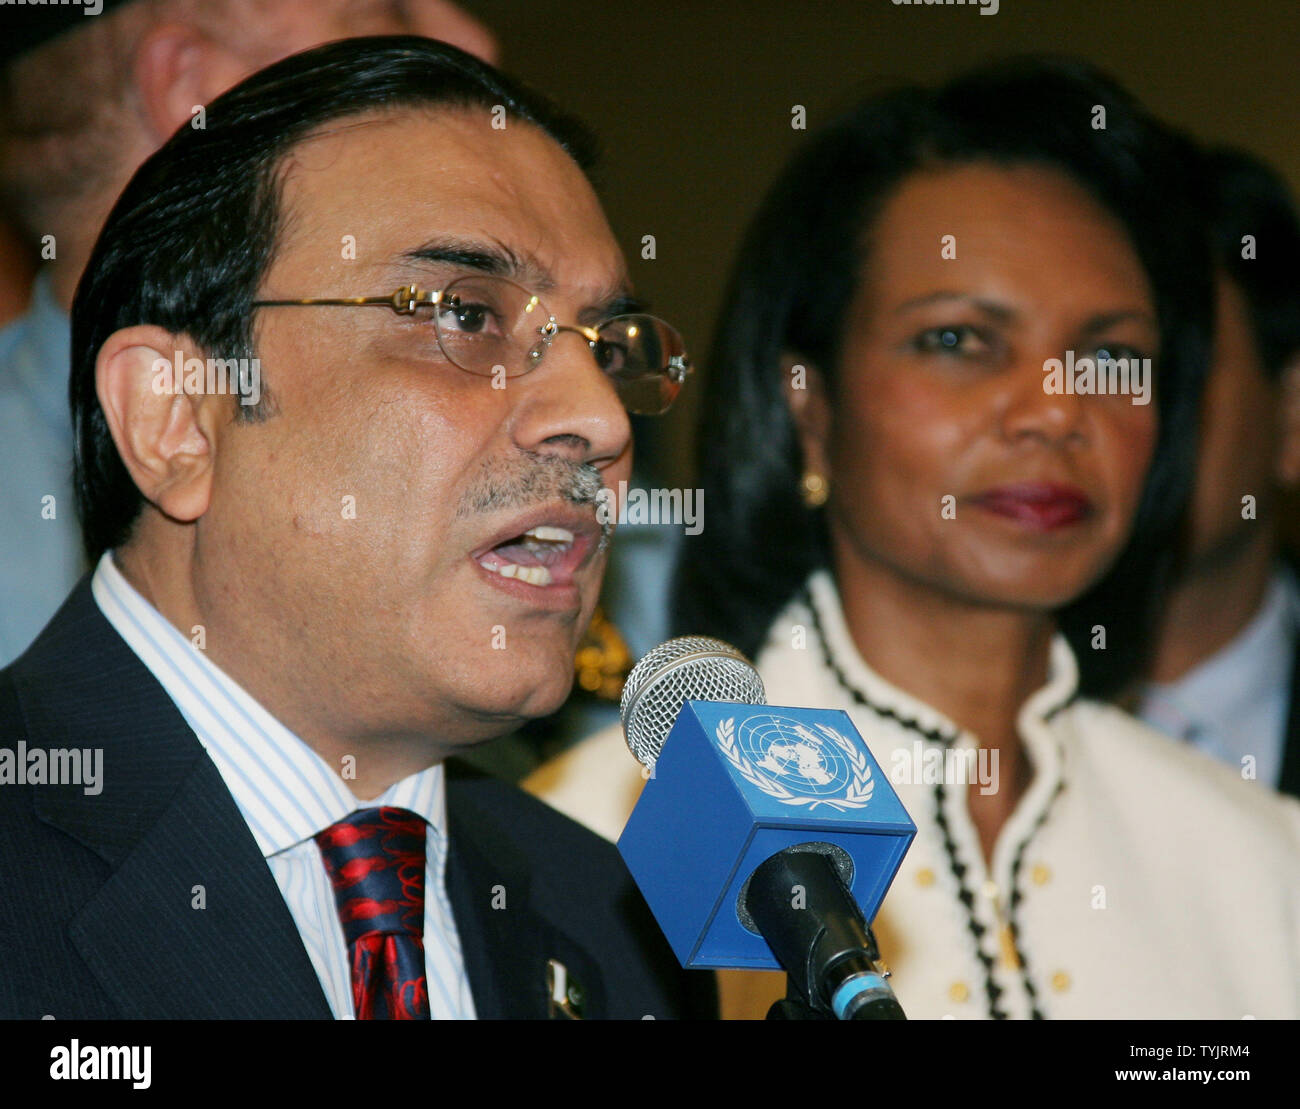 Asif Ali Zardari, president of Pakistan, talks to the press as Secretary of State Condolezza Rice listens following their Friends of Pakistan meeting during the 63rd session of the General Assembly at the United Nations on September 26, 2008 in New York City. (UPI Photo/Monika Graff) Stock Photo